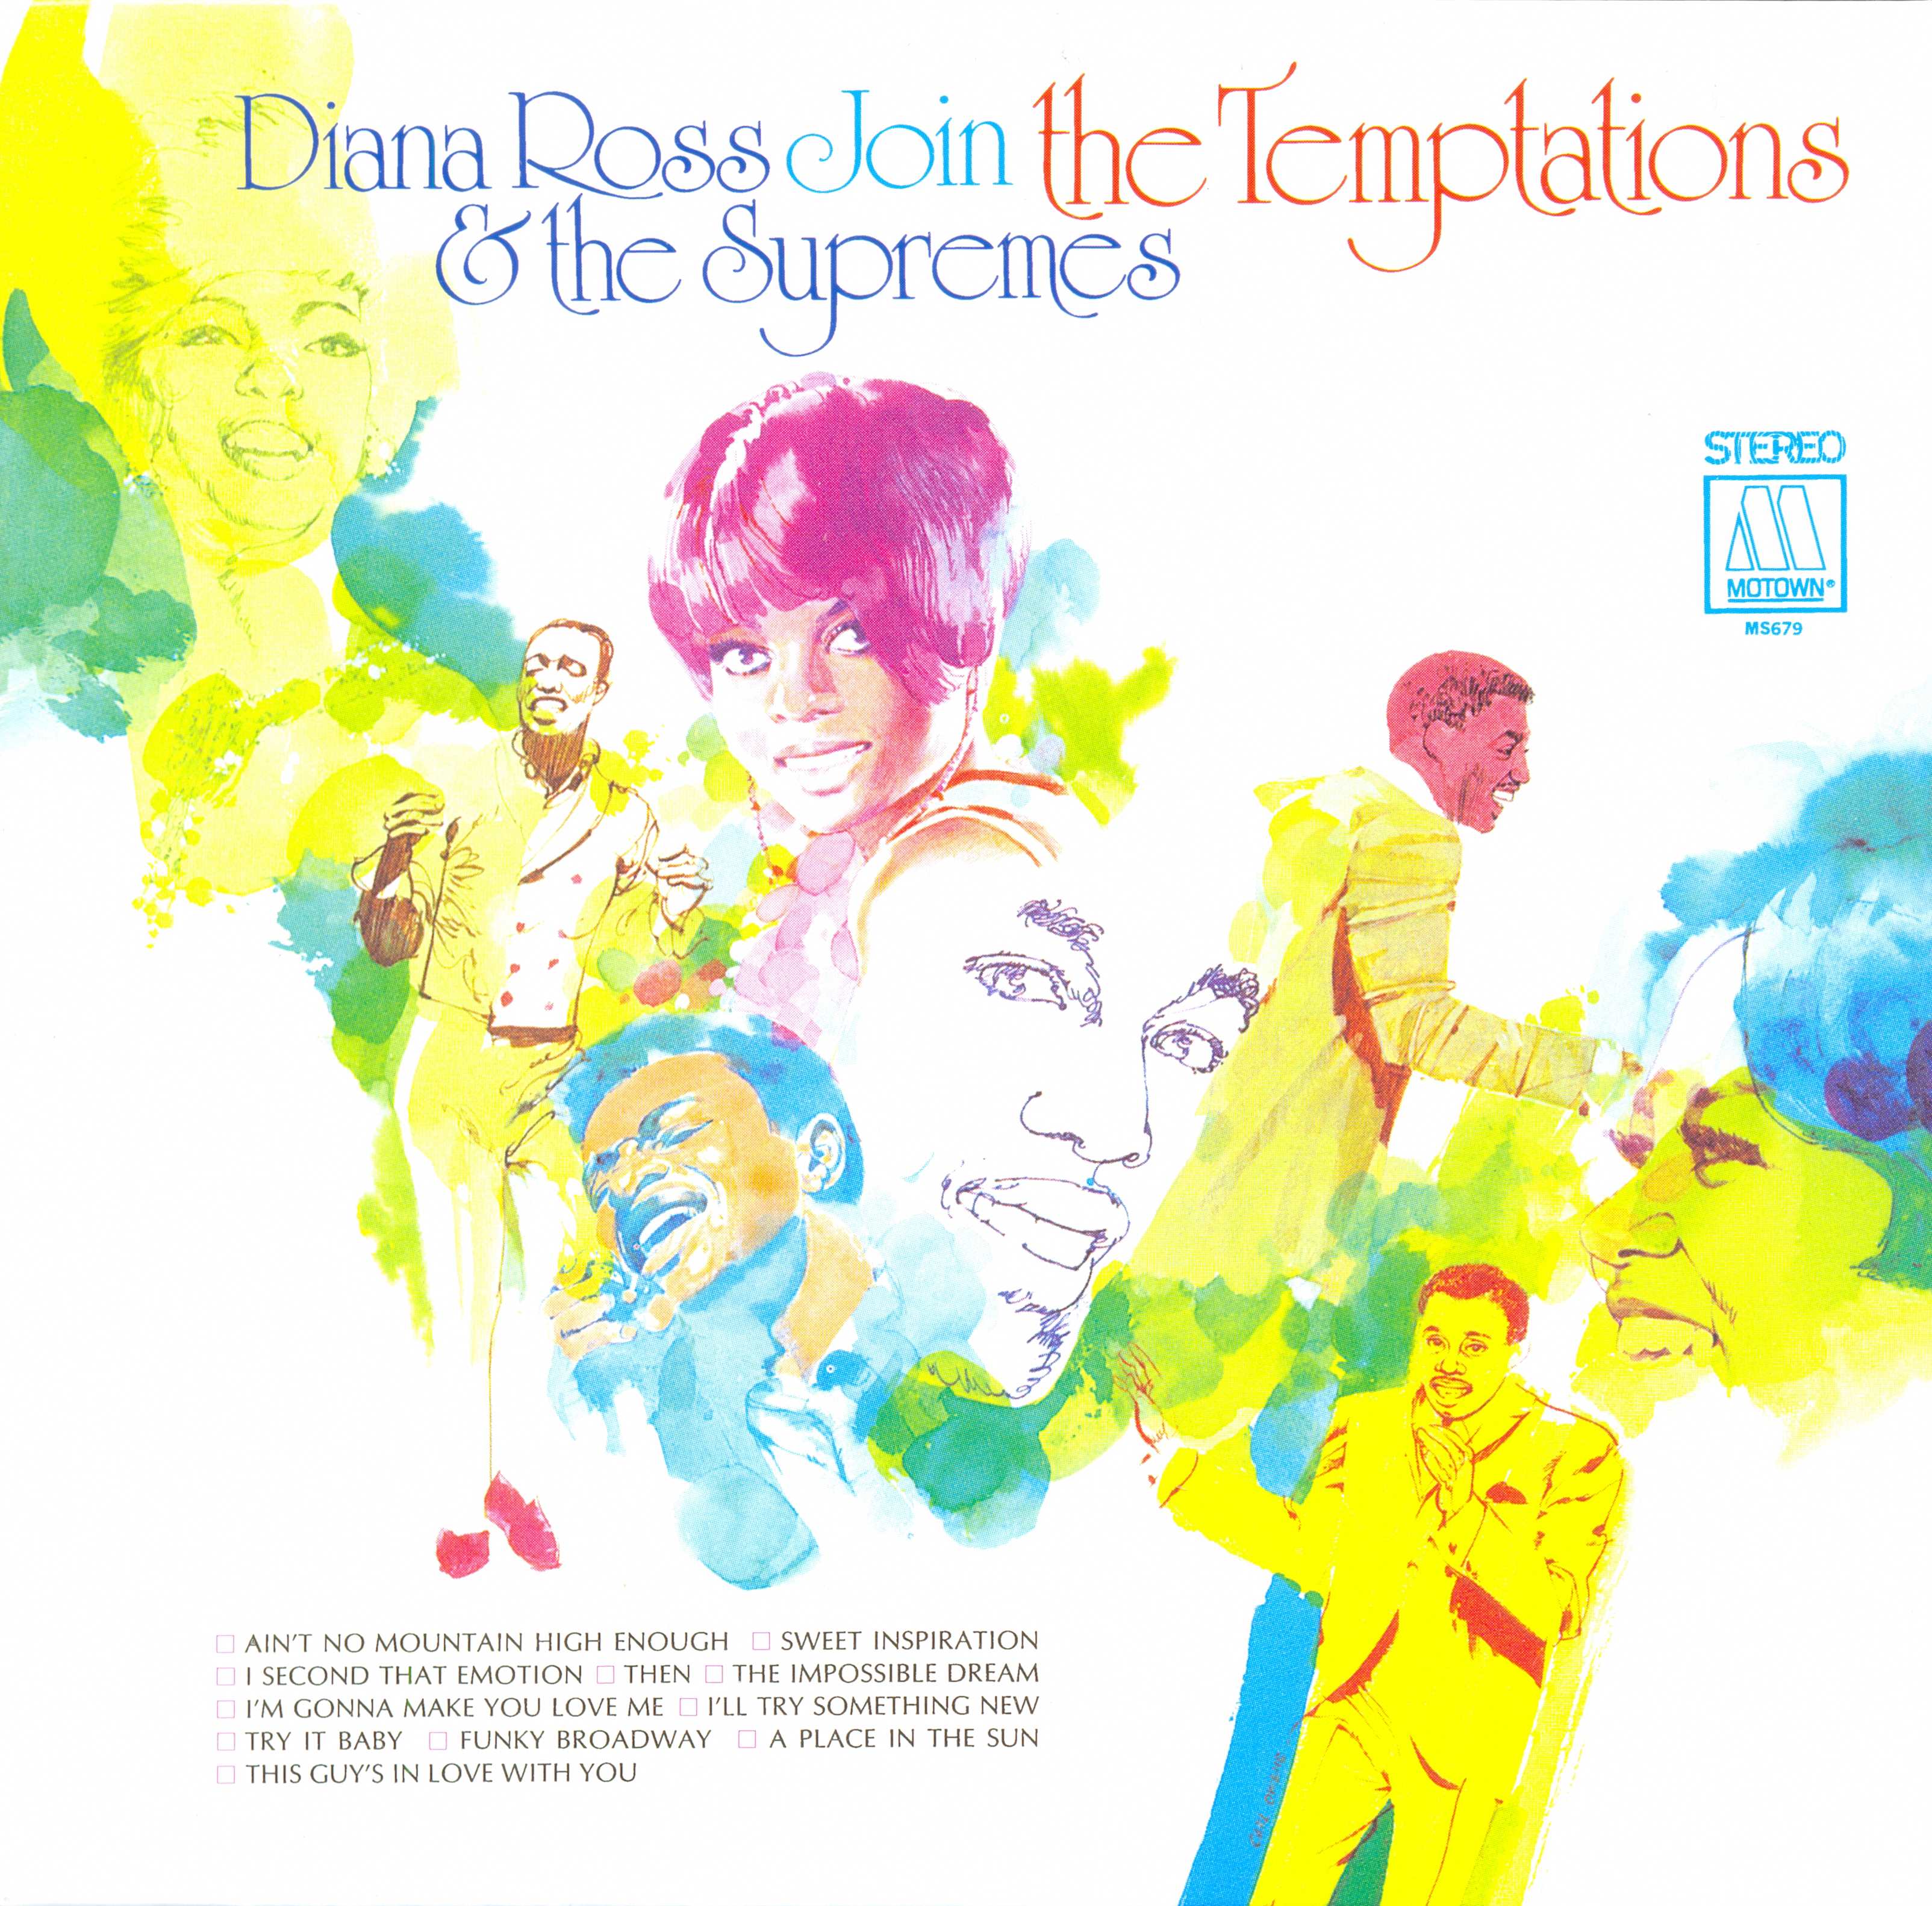 1968 - Diana Ross & The Supremes - Join The Temptations